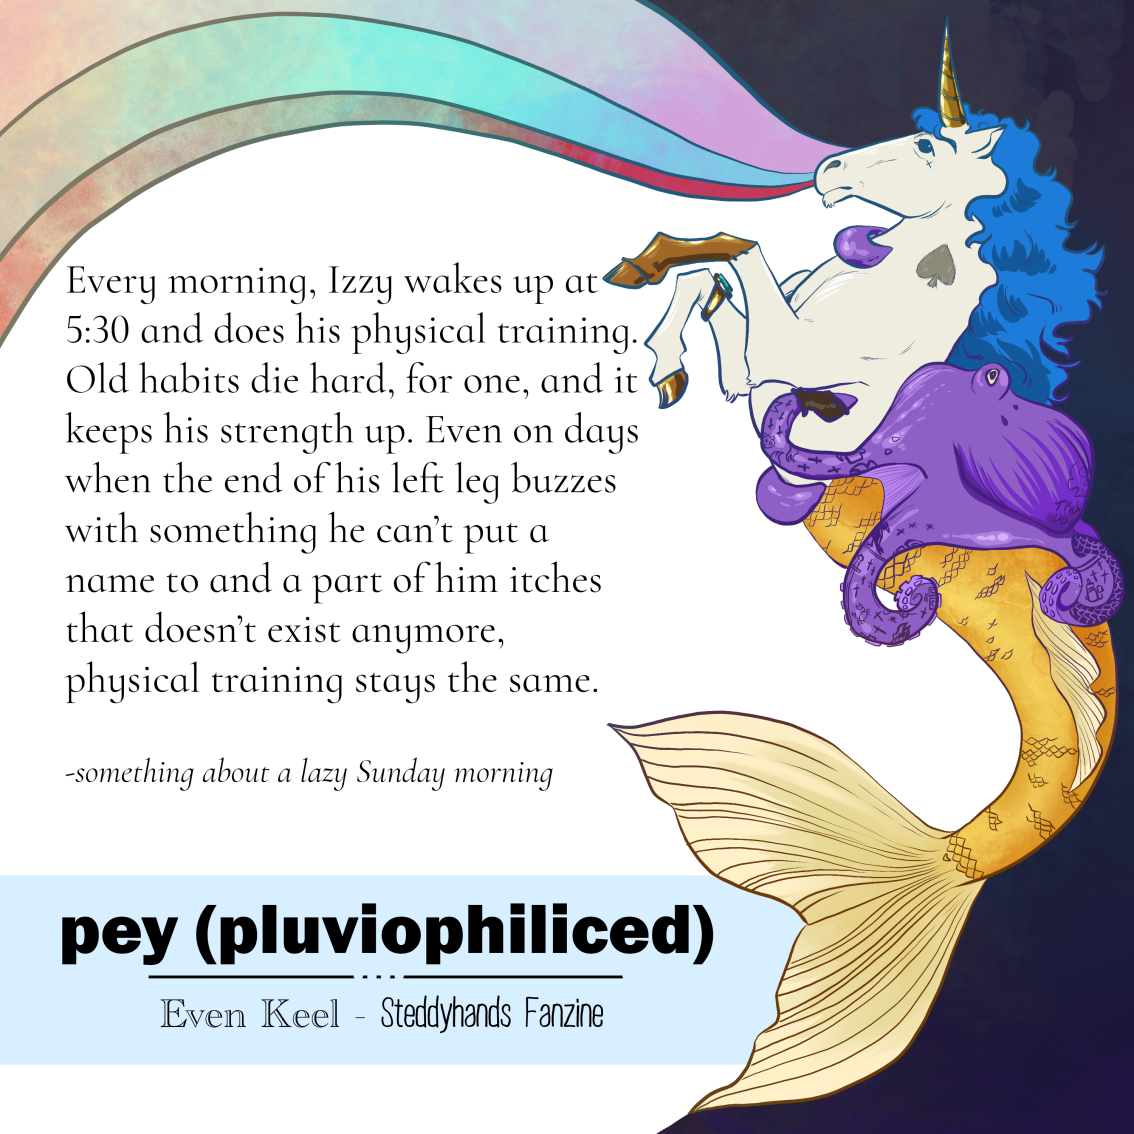 🦄 CONTRIBUTOR ♠ SPOTLIGHT 🐙
Here’s a preview of the wonderful fic @pluviophiliced did for our OFMD Steddyhands zine!
Preorders are open Jan 20-Feb 29